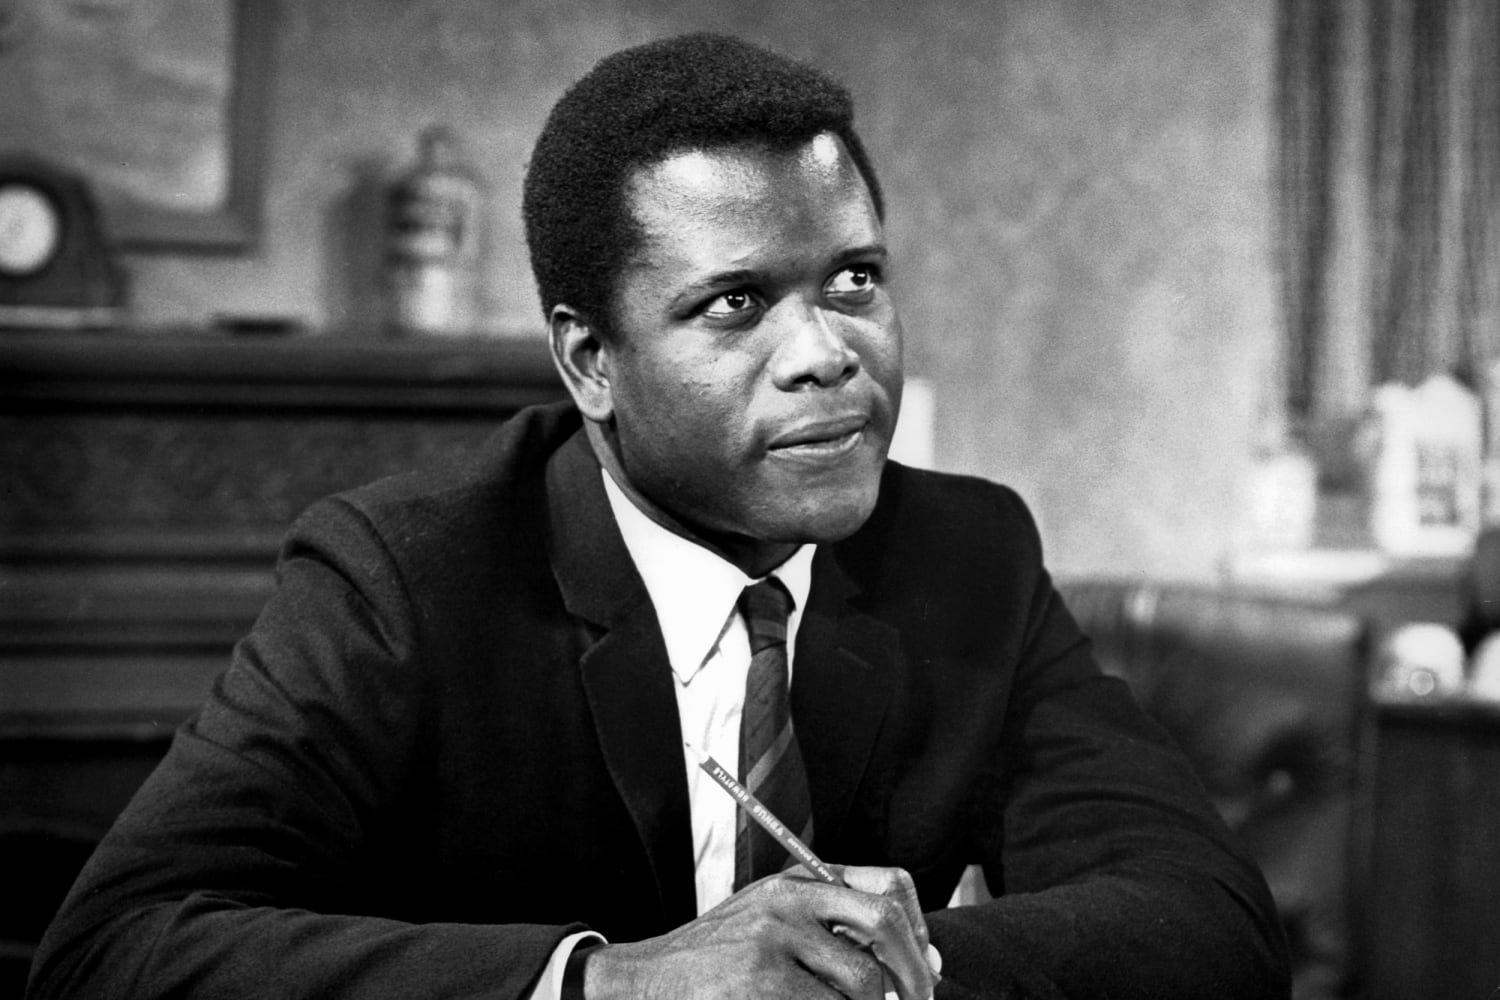 Sidney Poitier, trailblazing Hollywood icon who broke barriers for Black actors, dies at 94